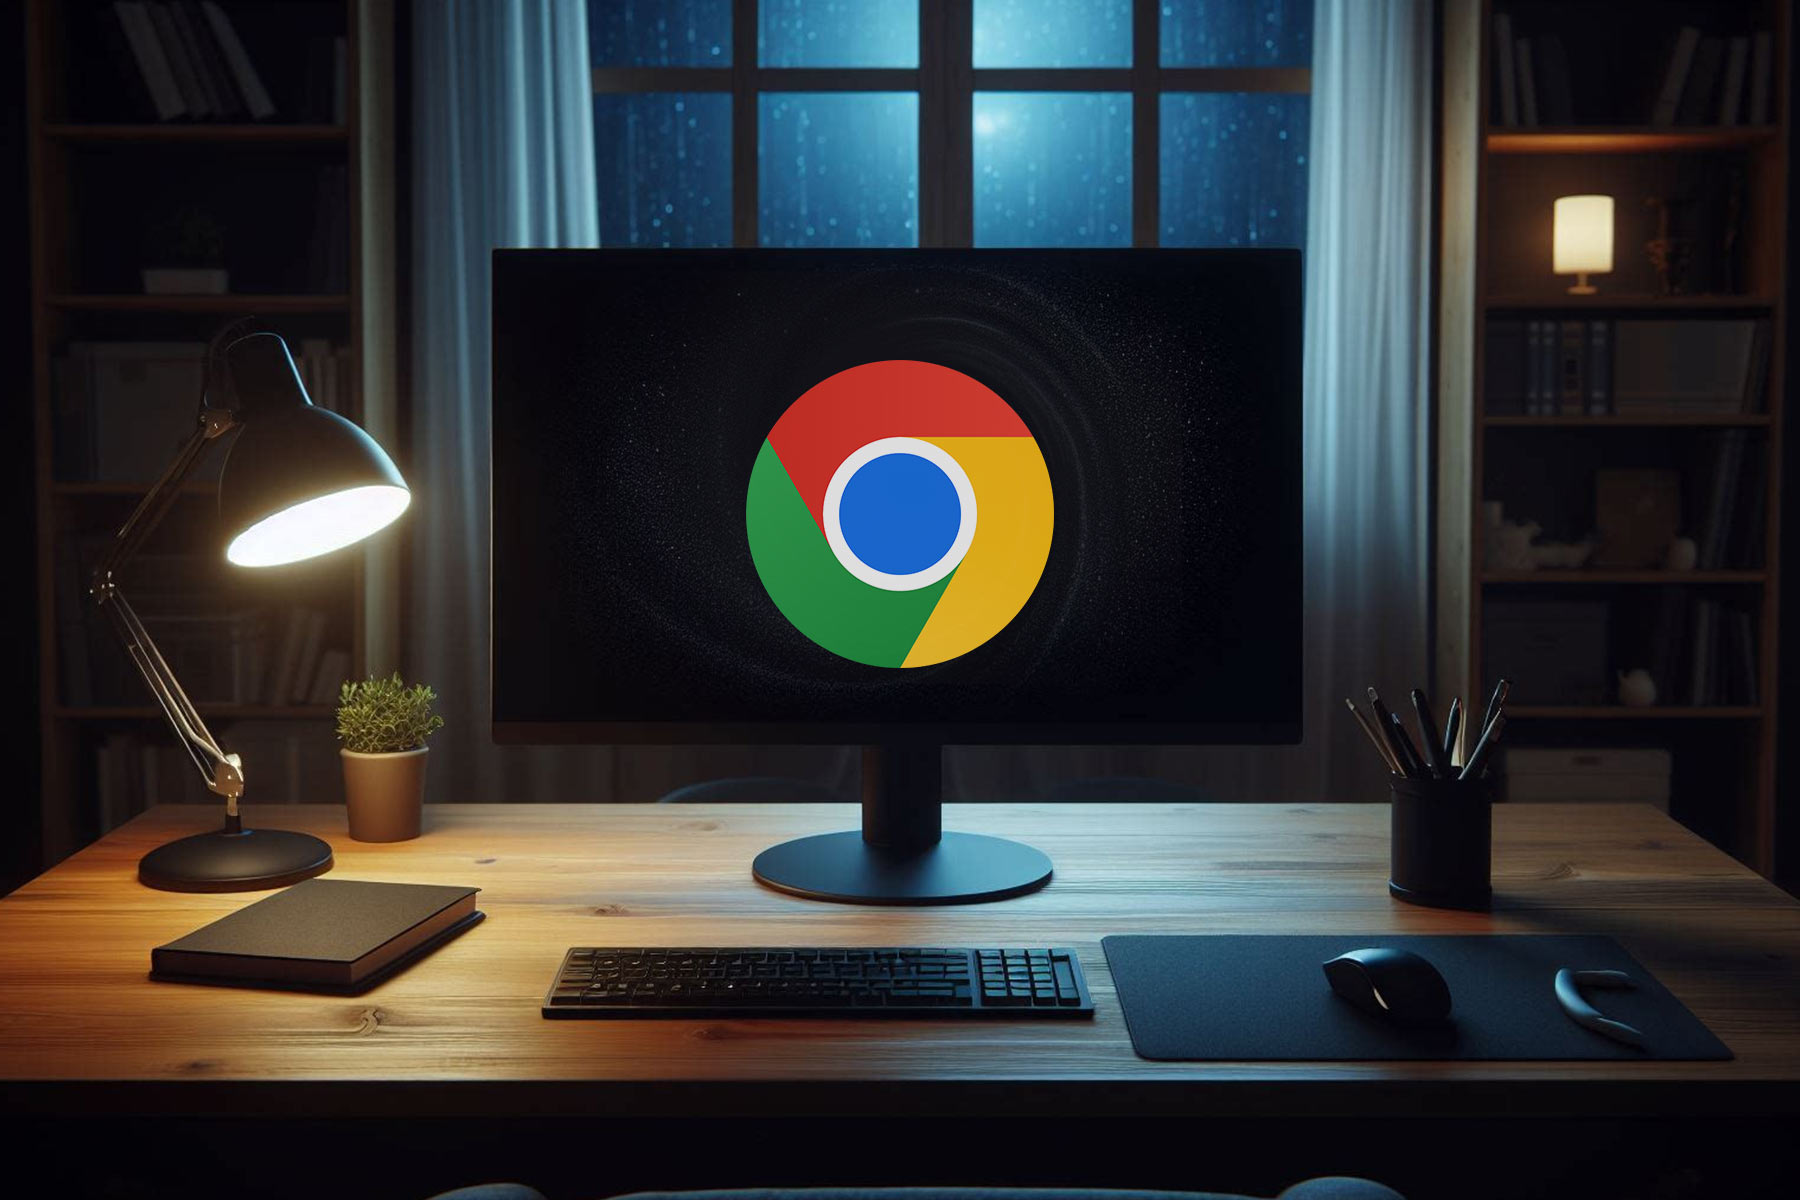 Chrome to use Windows ‘audio offload’ feature to improve battery life of Laptops